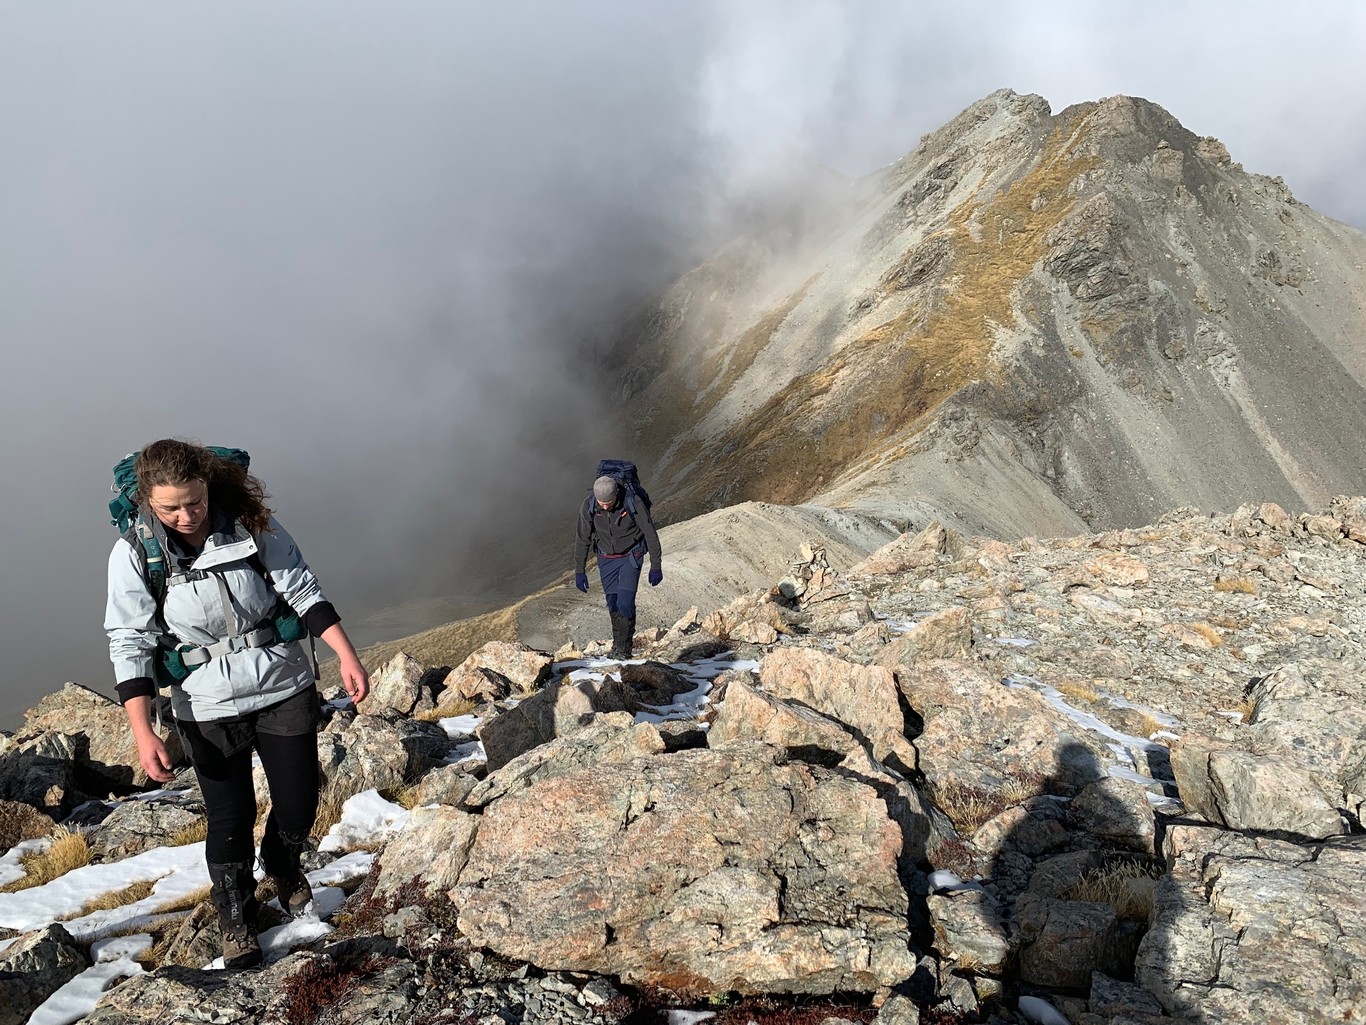 Two people with tramping packs walking along a ridge with grey cloud, rocks and short grassy slopes